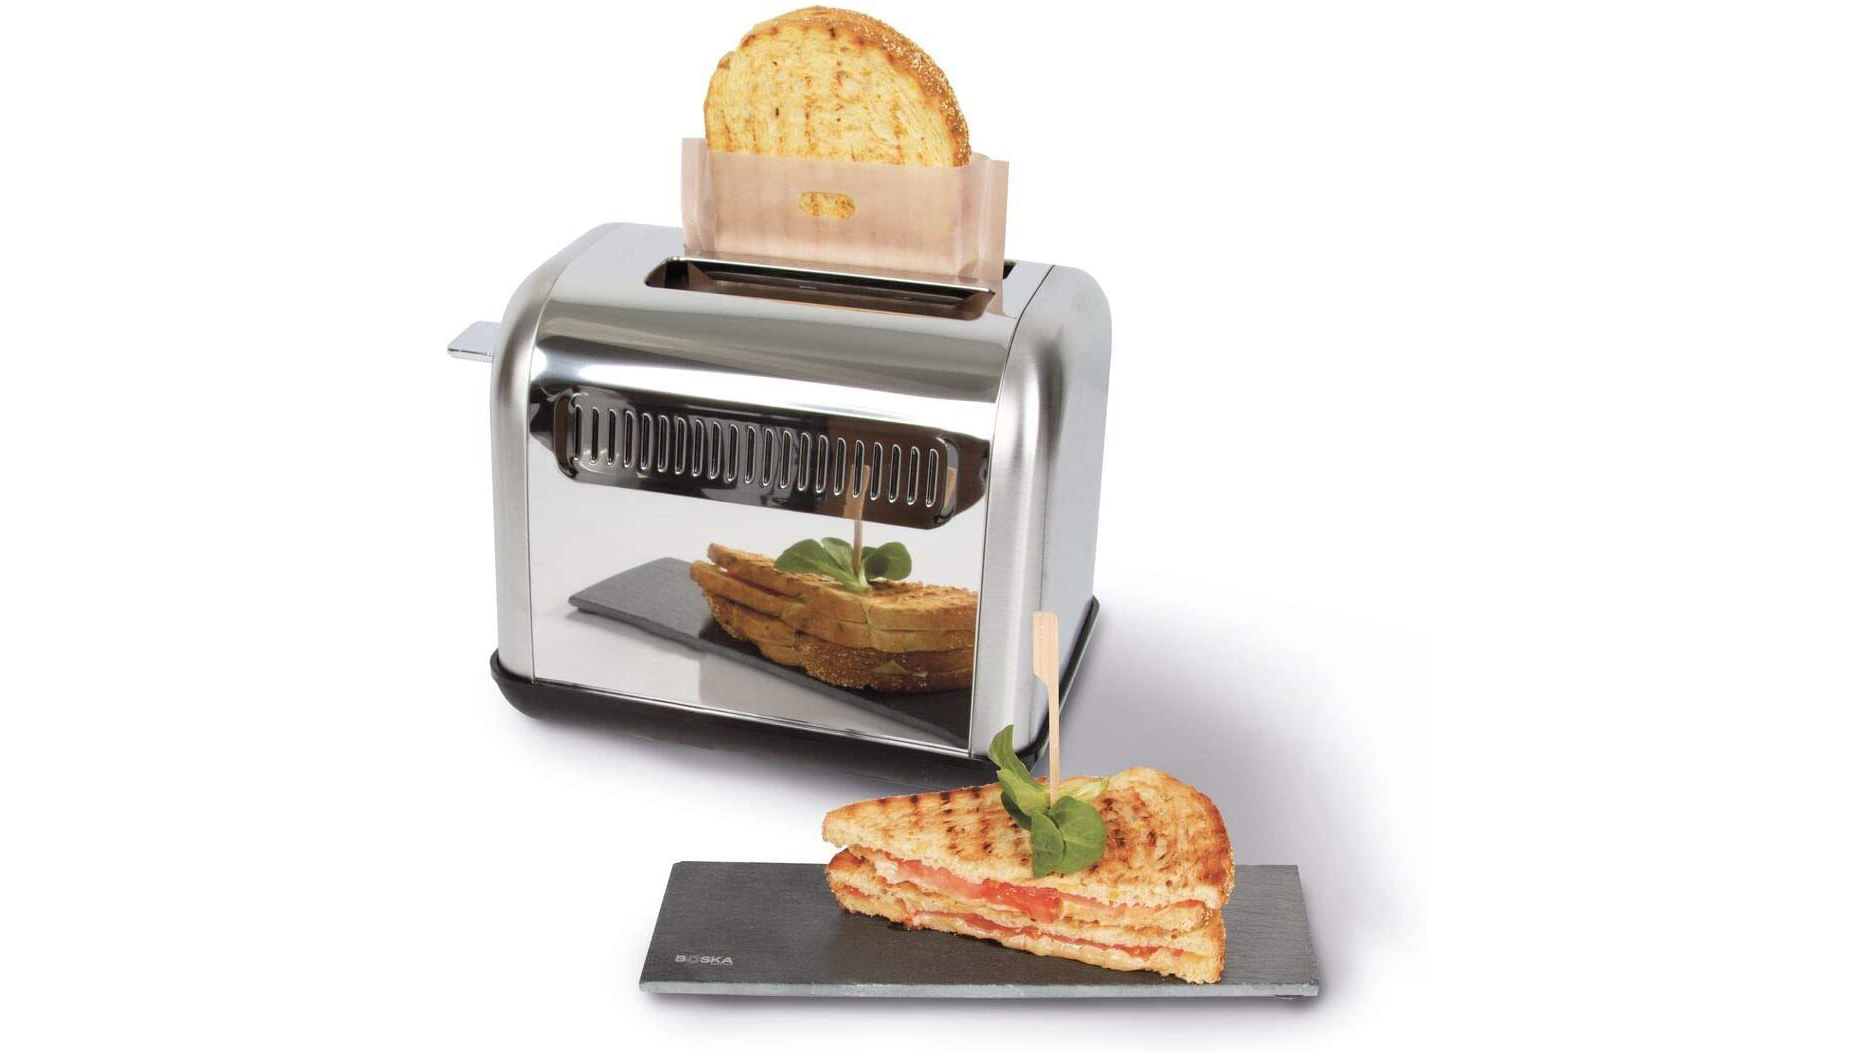 Reusable Toaster For Grilled Cheese More Must-Have Kitchen Gadgets For 2021 | Rachael Ray Show